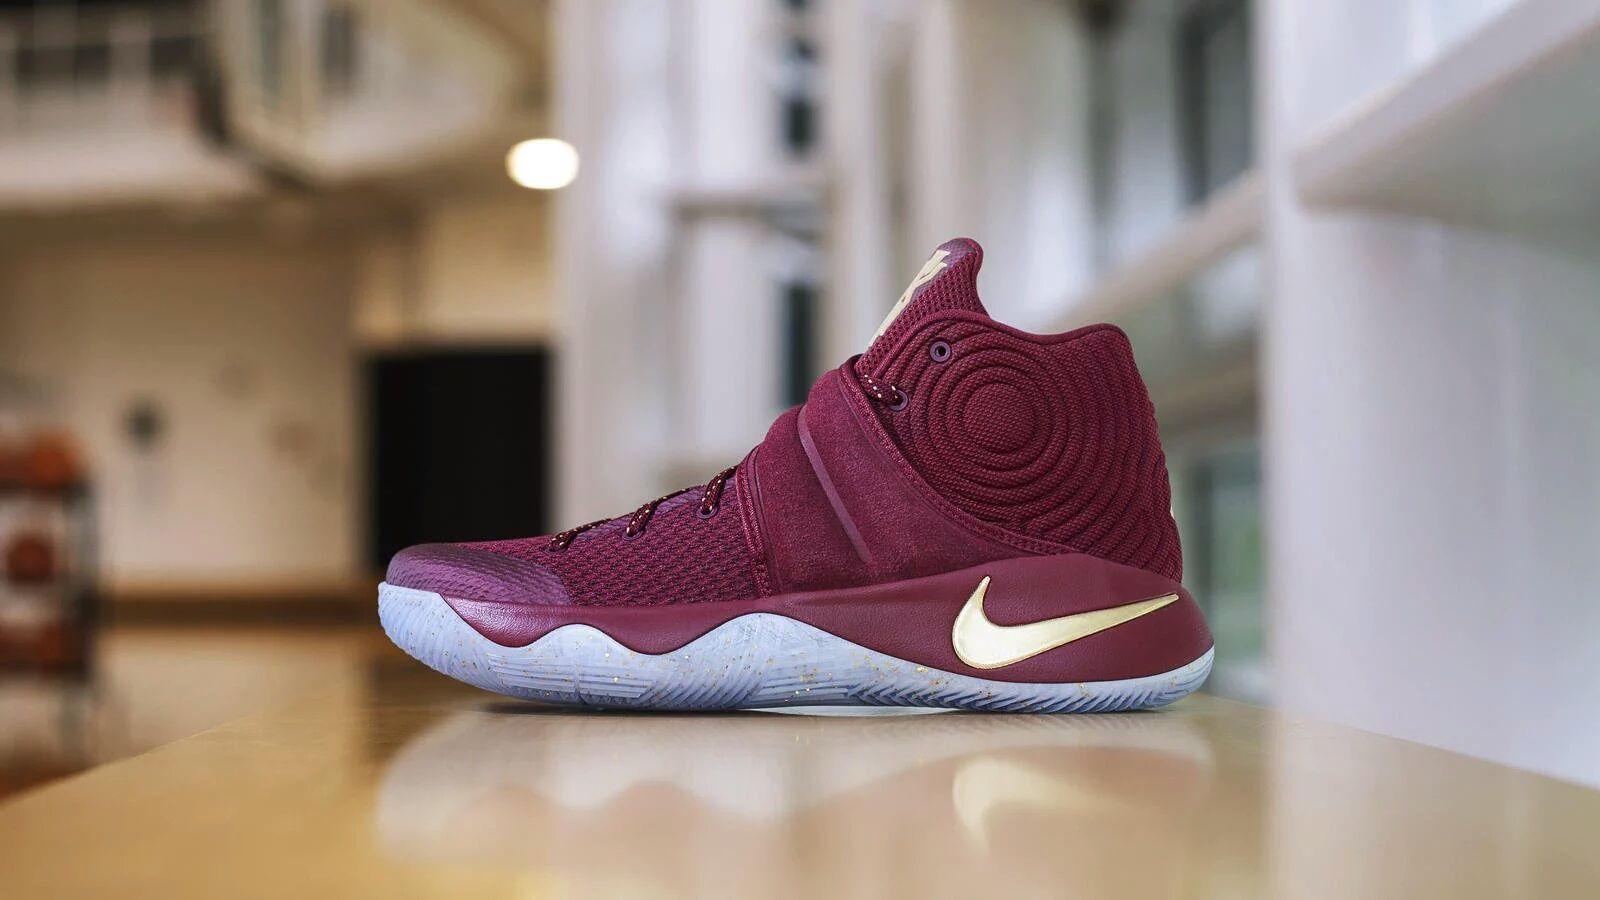 kyrie shoes maroon